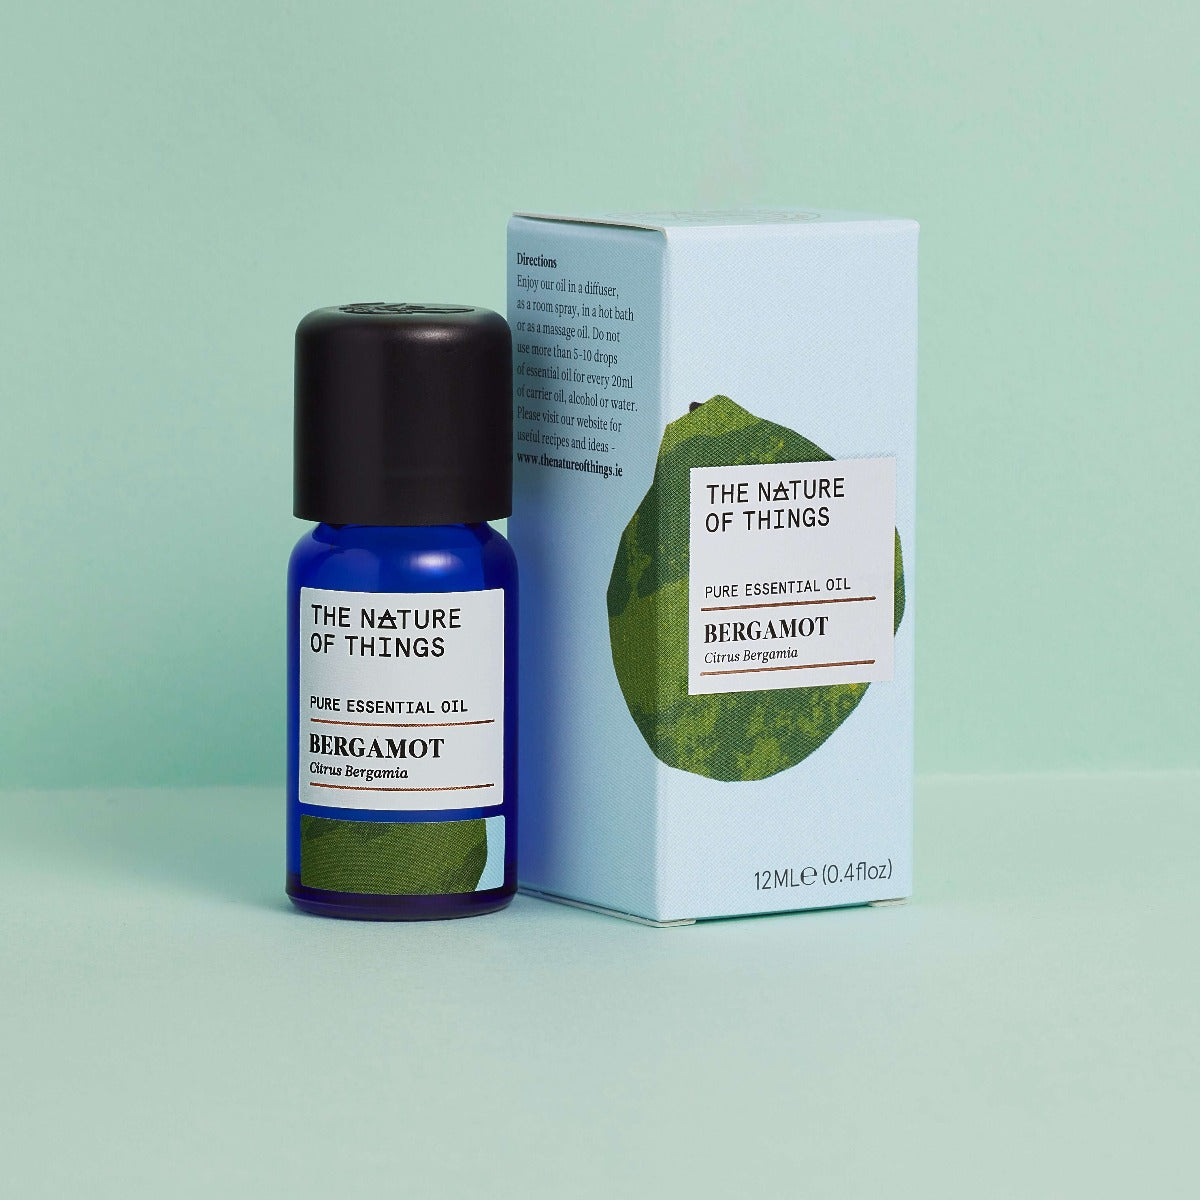 Bergamot Essential Oil from The Nature of Things